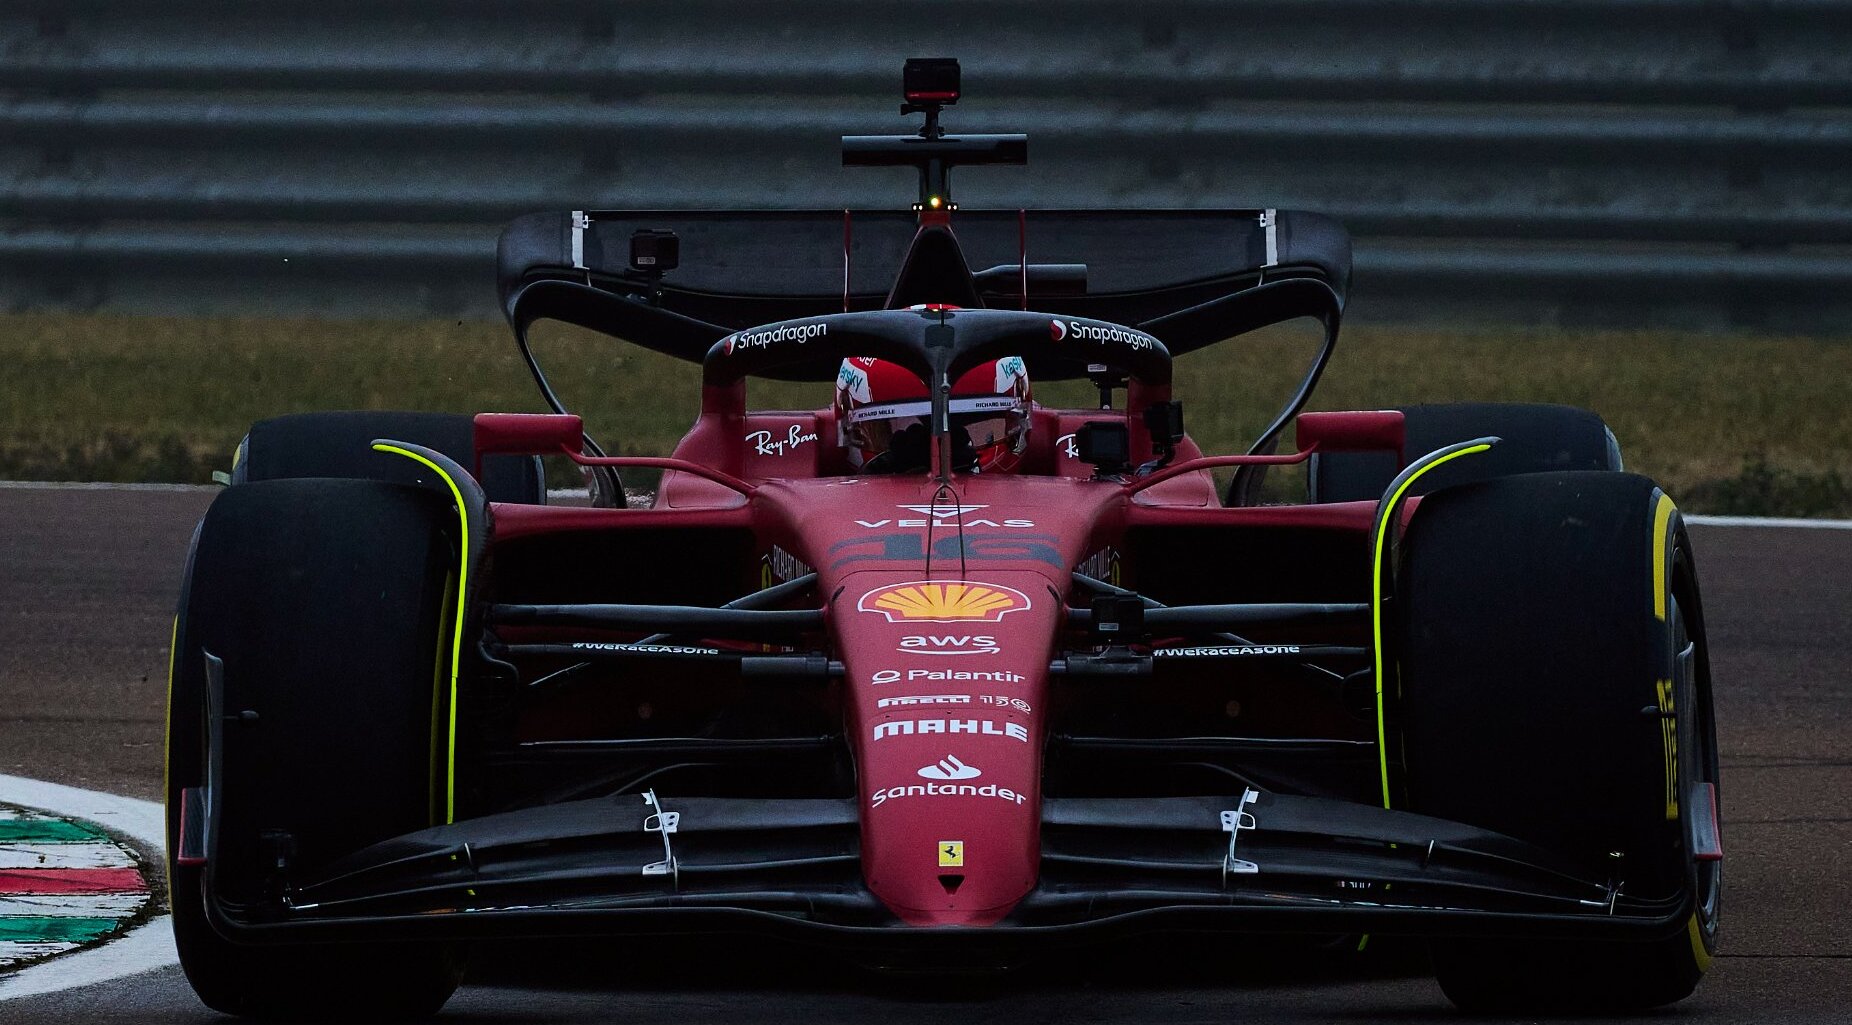 WATCH Ferraris 2022 F1 car sounds epic as it takes to the track